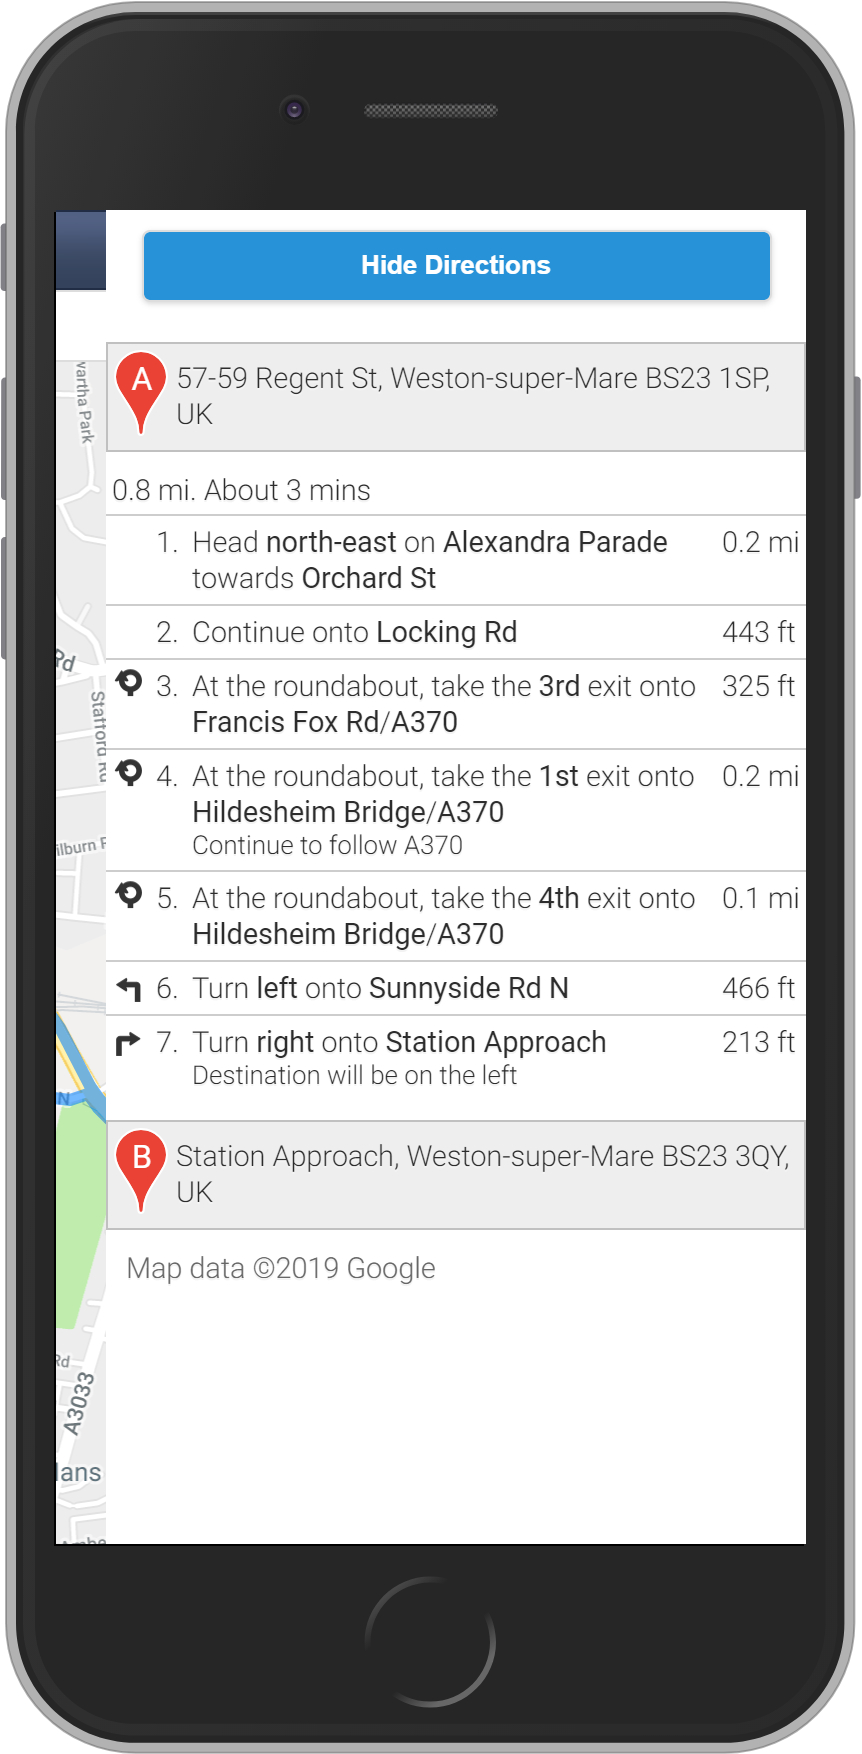 Salestracker Mobile Route Planner Directions